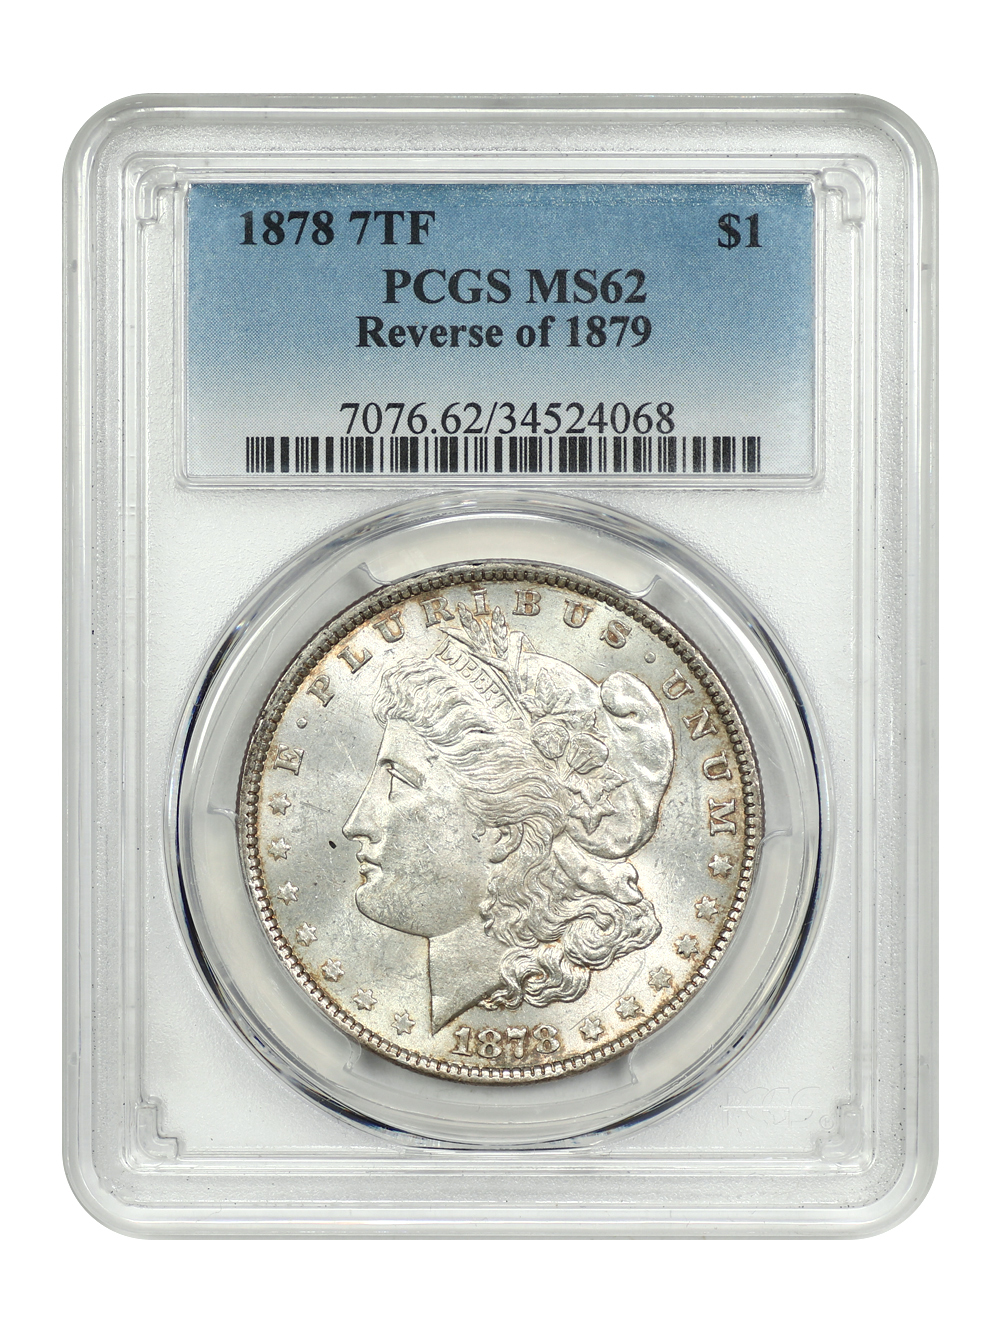 Primary image for 1878 7TF $1 PCGS MS62 (Rev. 1879)